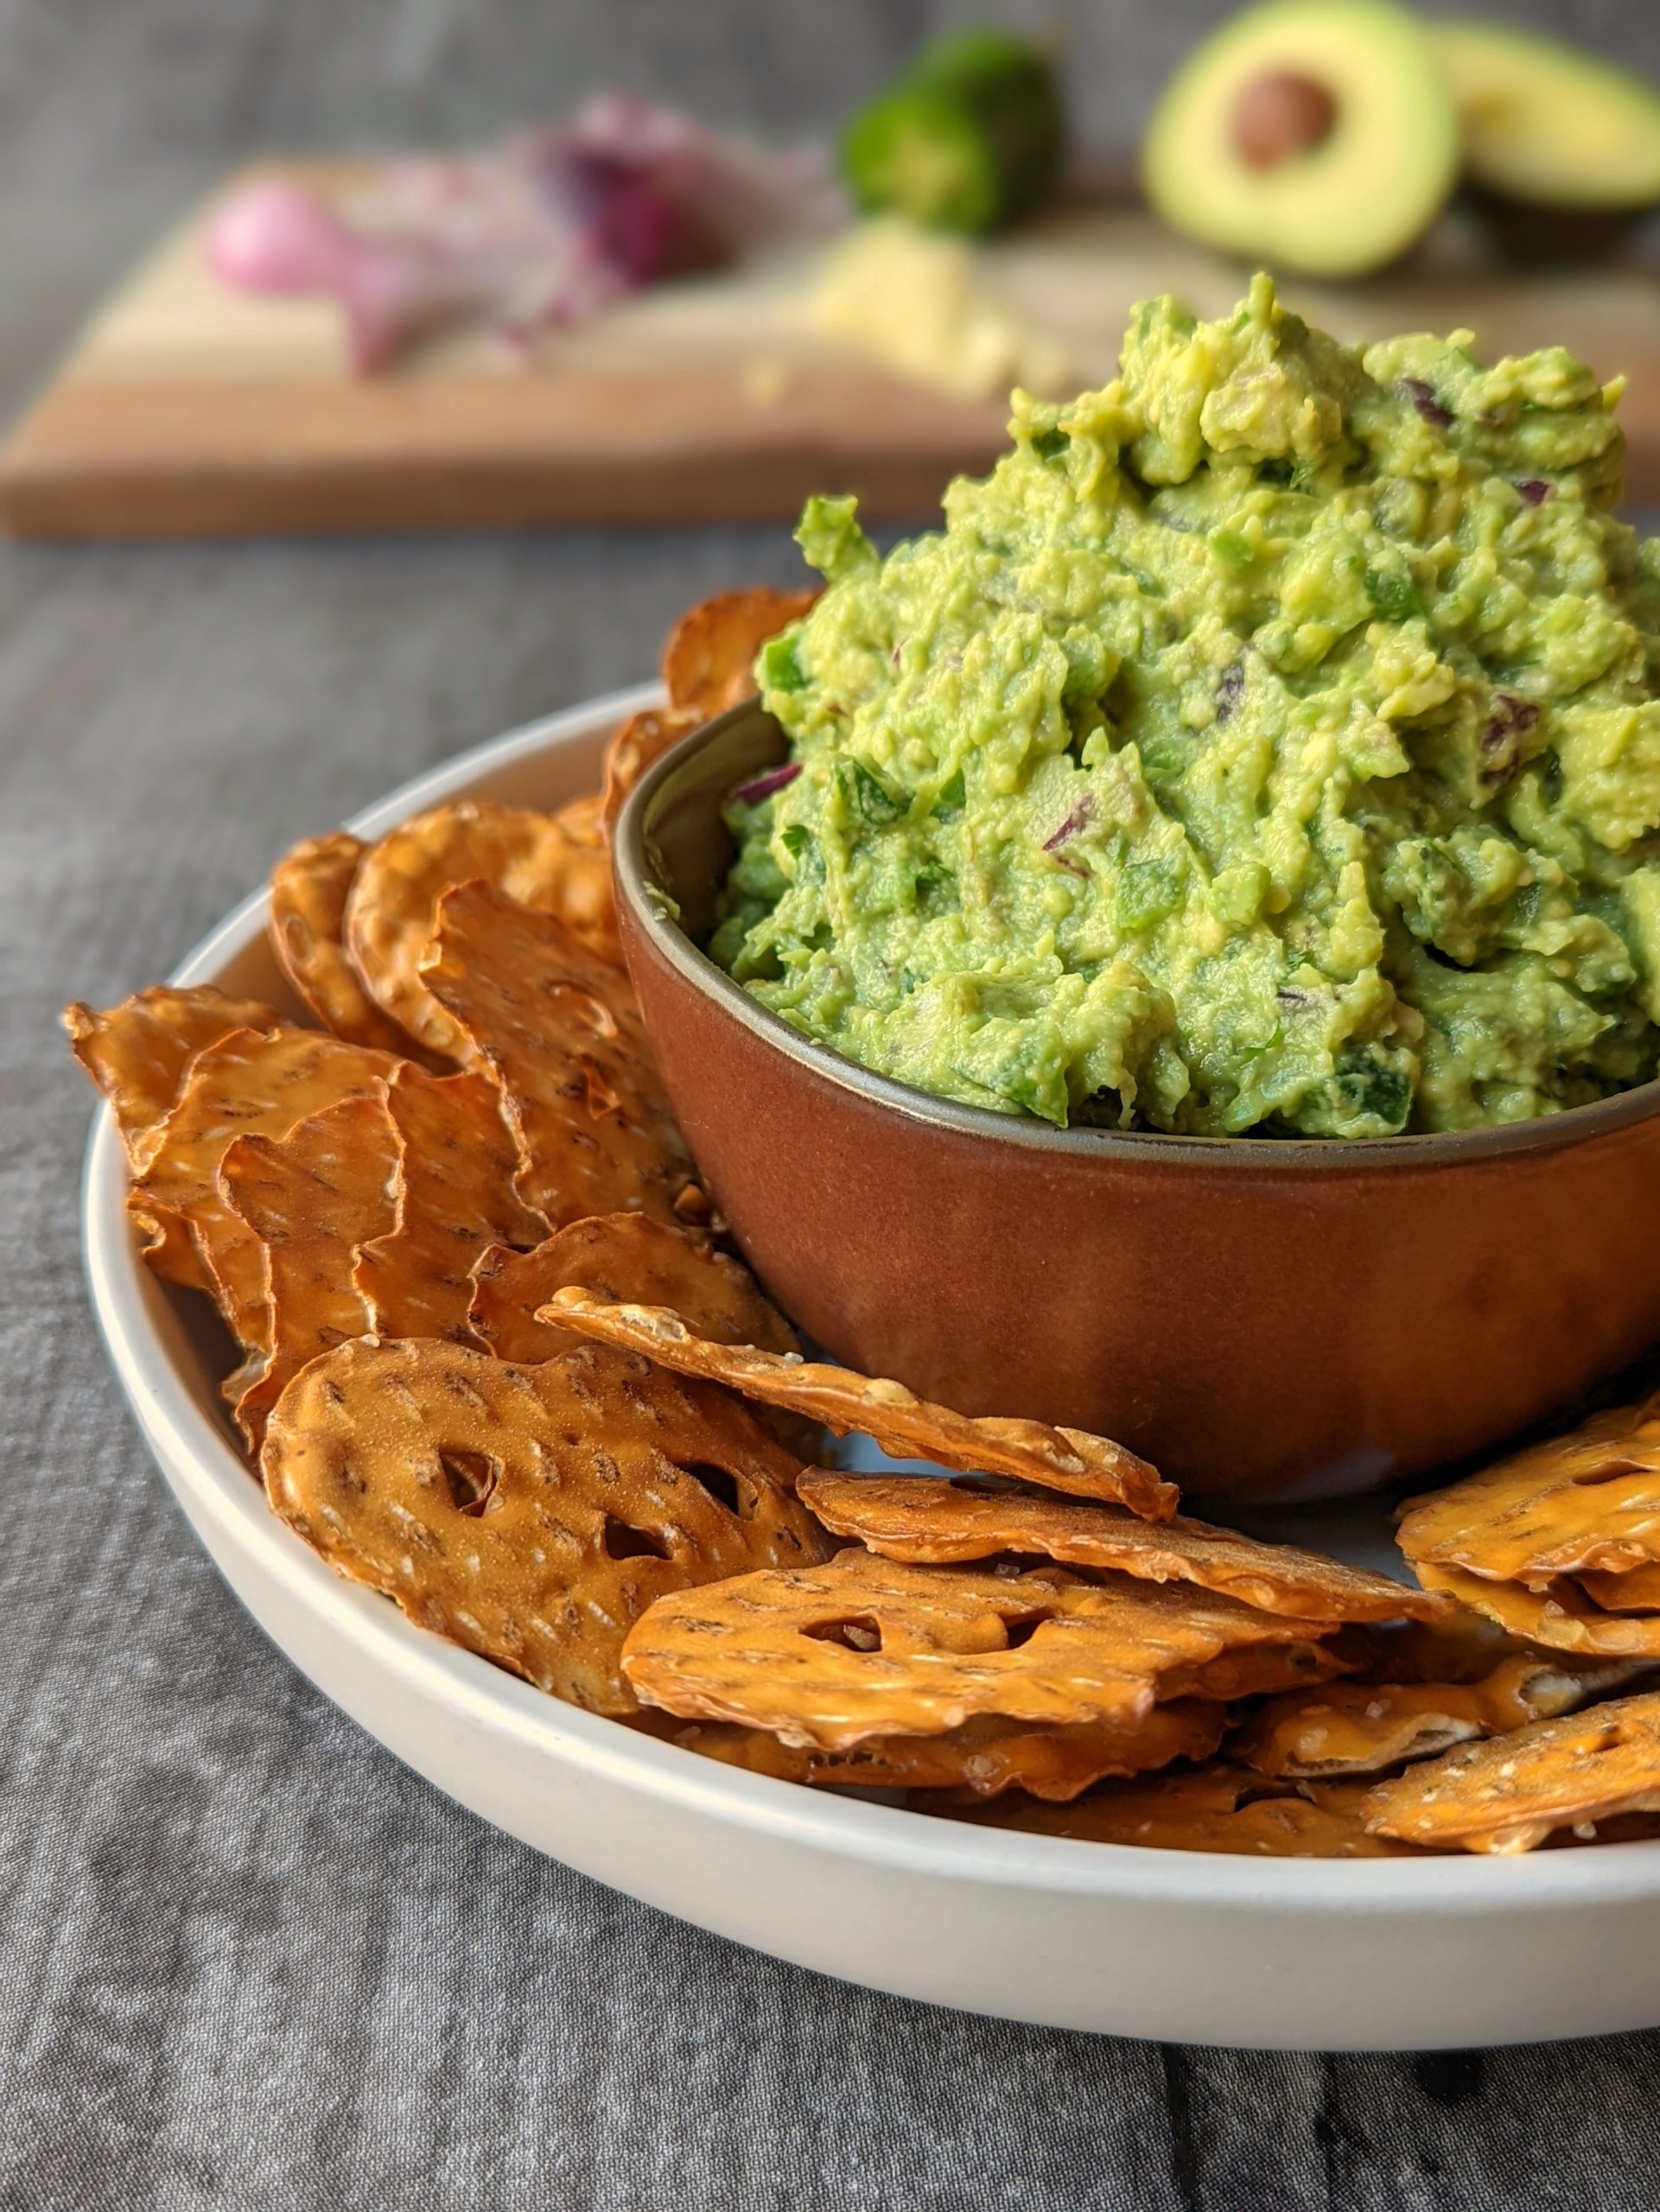 This is our simple guacamole recipe served with pretzel chips.